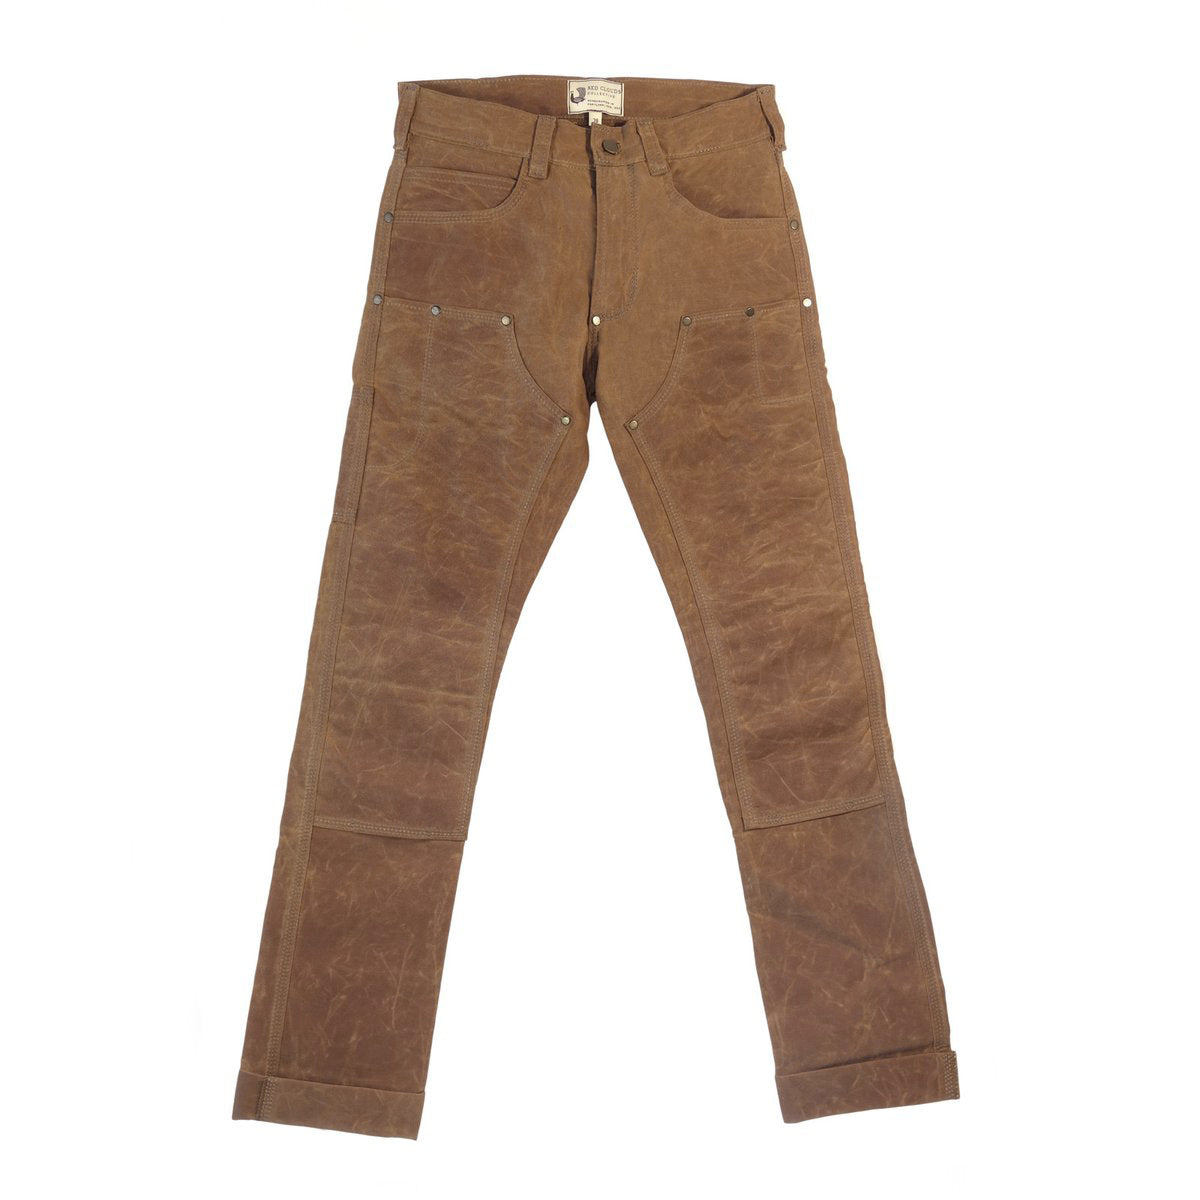 Sand Waxed Canvas Jeans